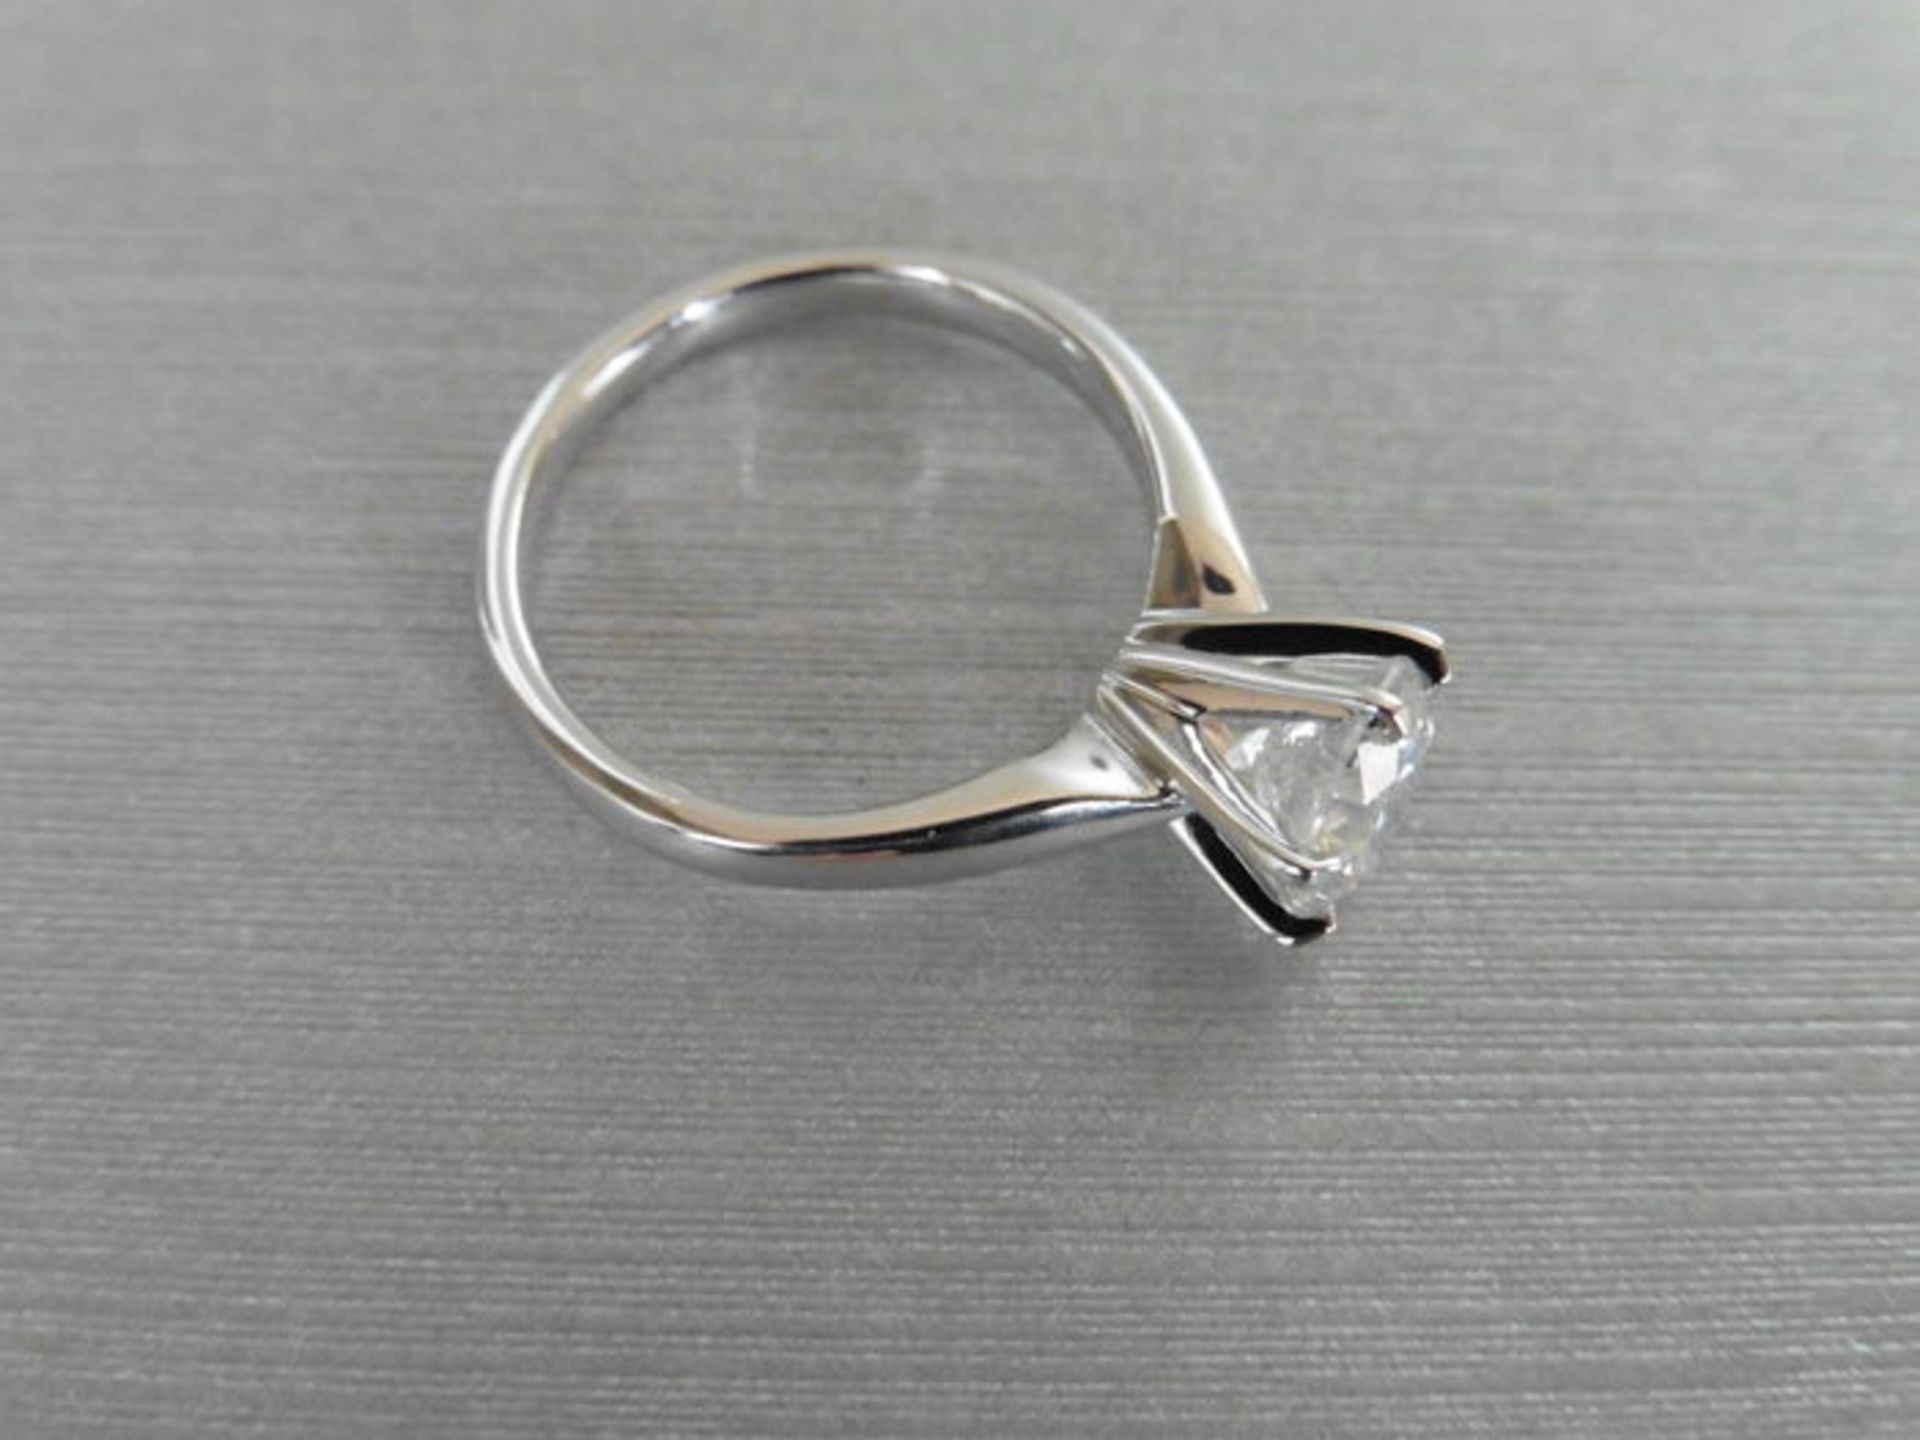 1.01ct diamond solitaire ring set in 18ct white gold. J colour and I1-2 clarity. 6 claw setting, - Image 3 of 3